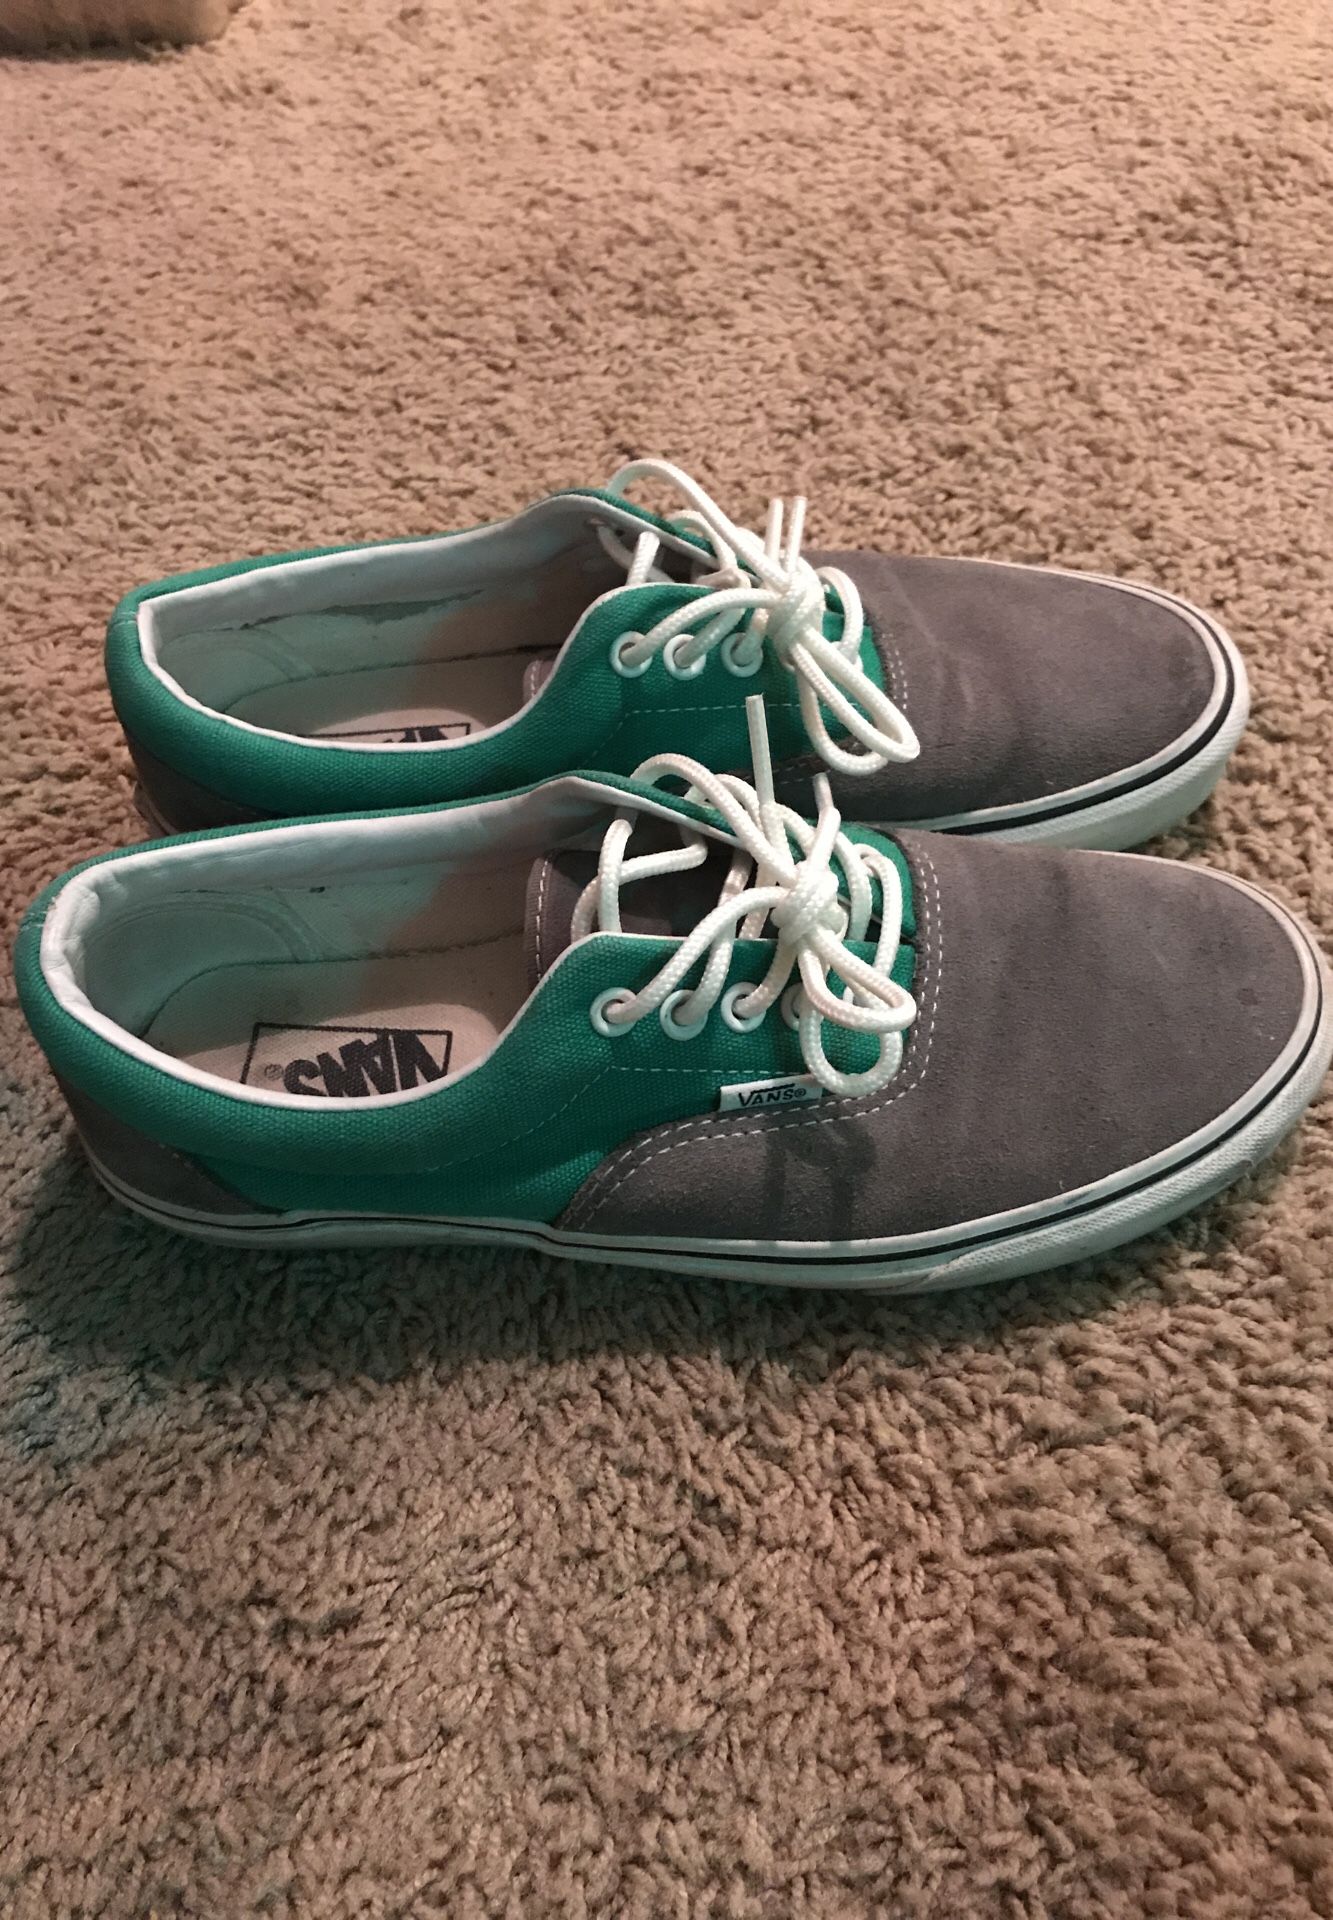 Vans Men’s 8.5 in Great Condition. Suede Toe Box, canvas heel area. Traditional Vans “Off the Wall” midsole and Gum soles.